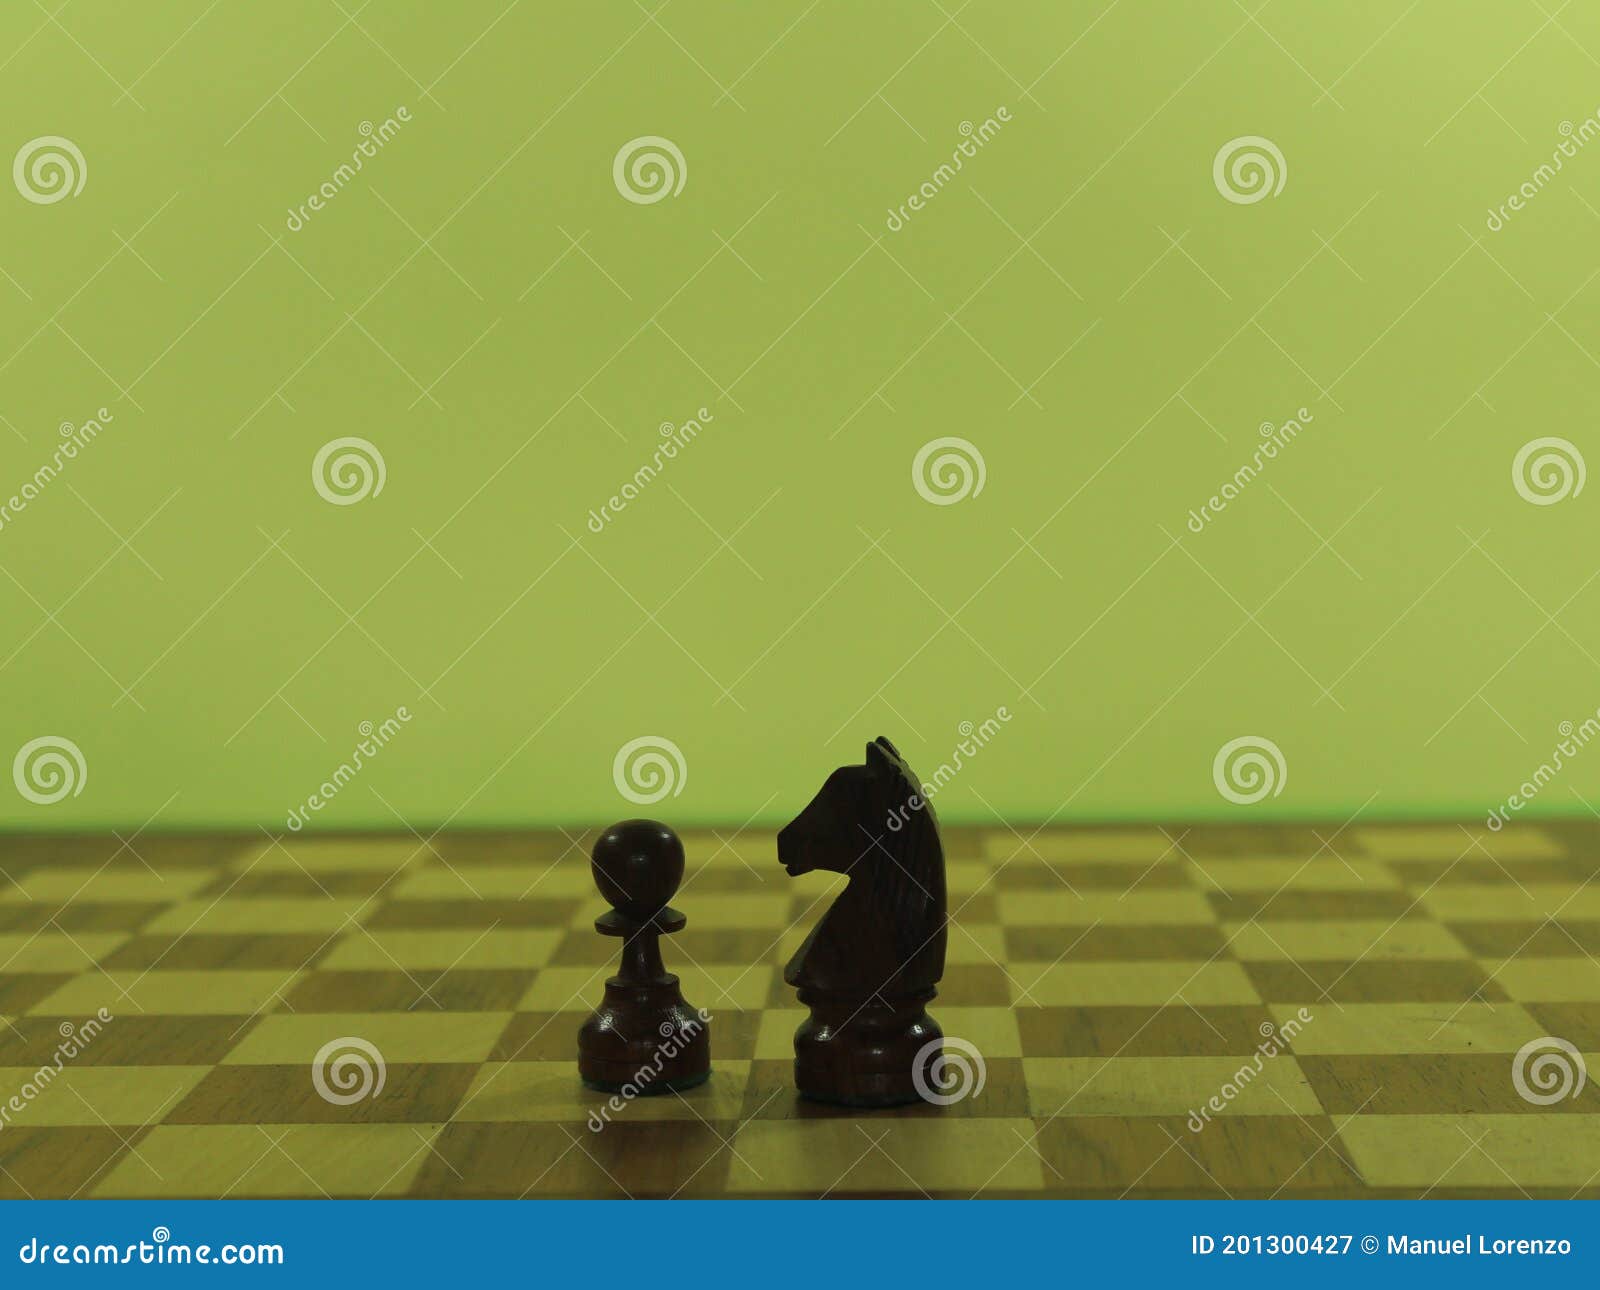 figures chess plays checkmate fun intelligence king horse bishop tower pawn